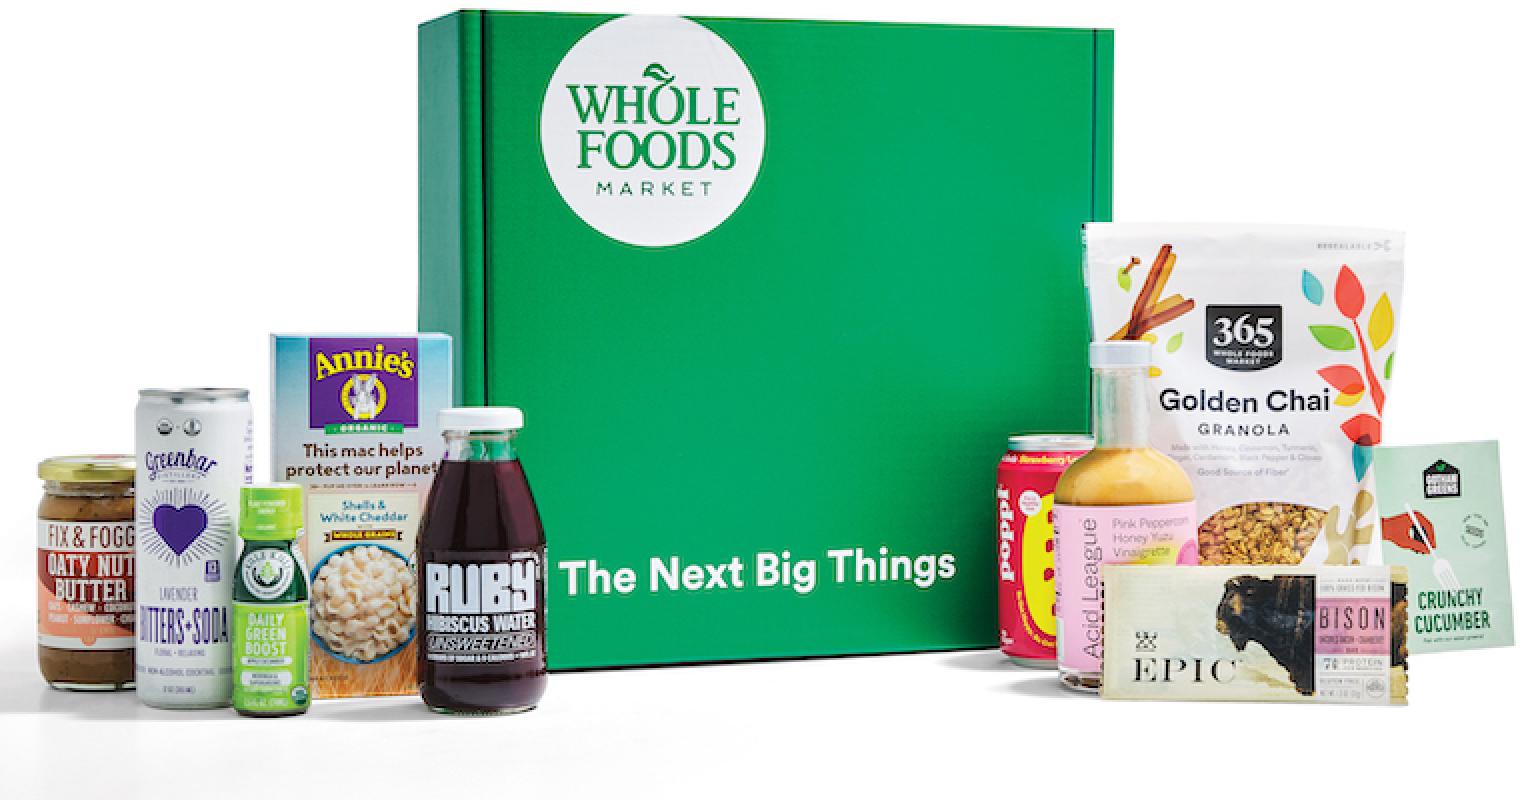 https://www.supermarketnews.com/sites/supermarketnews.com/files/styles/article_featured_retina/public/Whole_Foods_Market-top_food_trends_2022-Trends_Discovery_Box.jpg?itok=o5qfPSBS